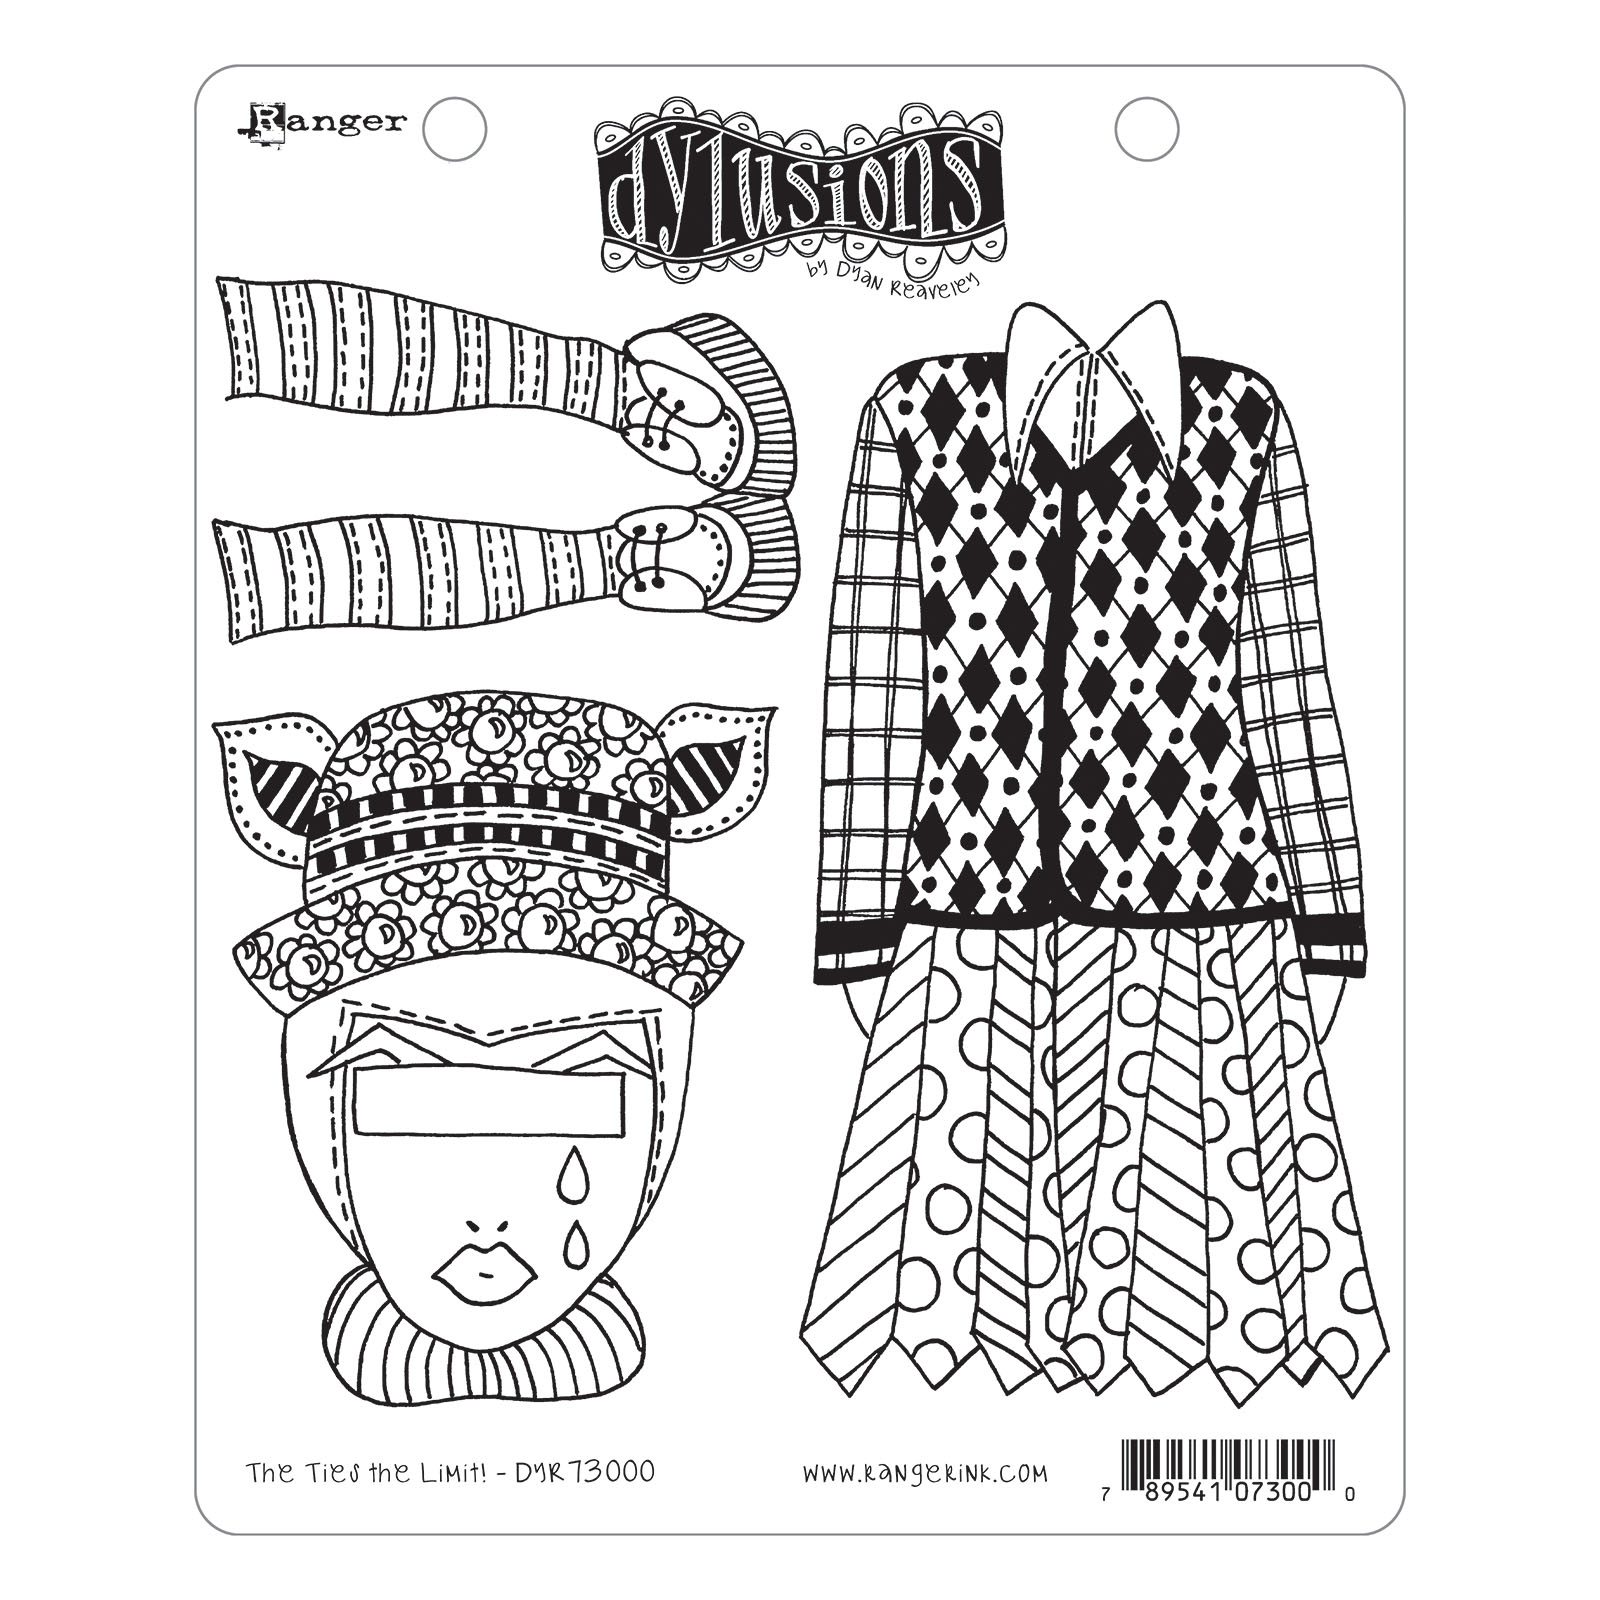 Ranger • Dylusions cling Mount Stamp The Ties The Limit!